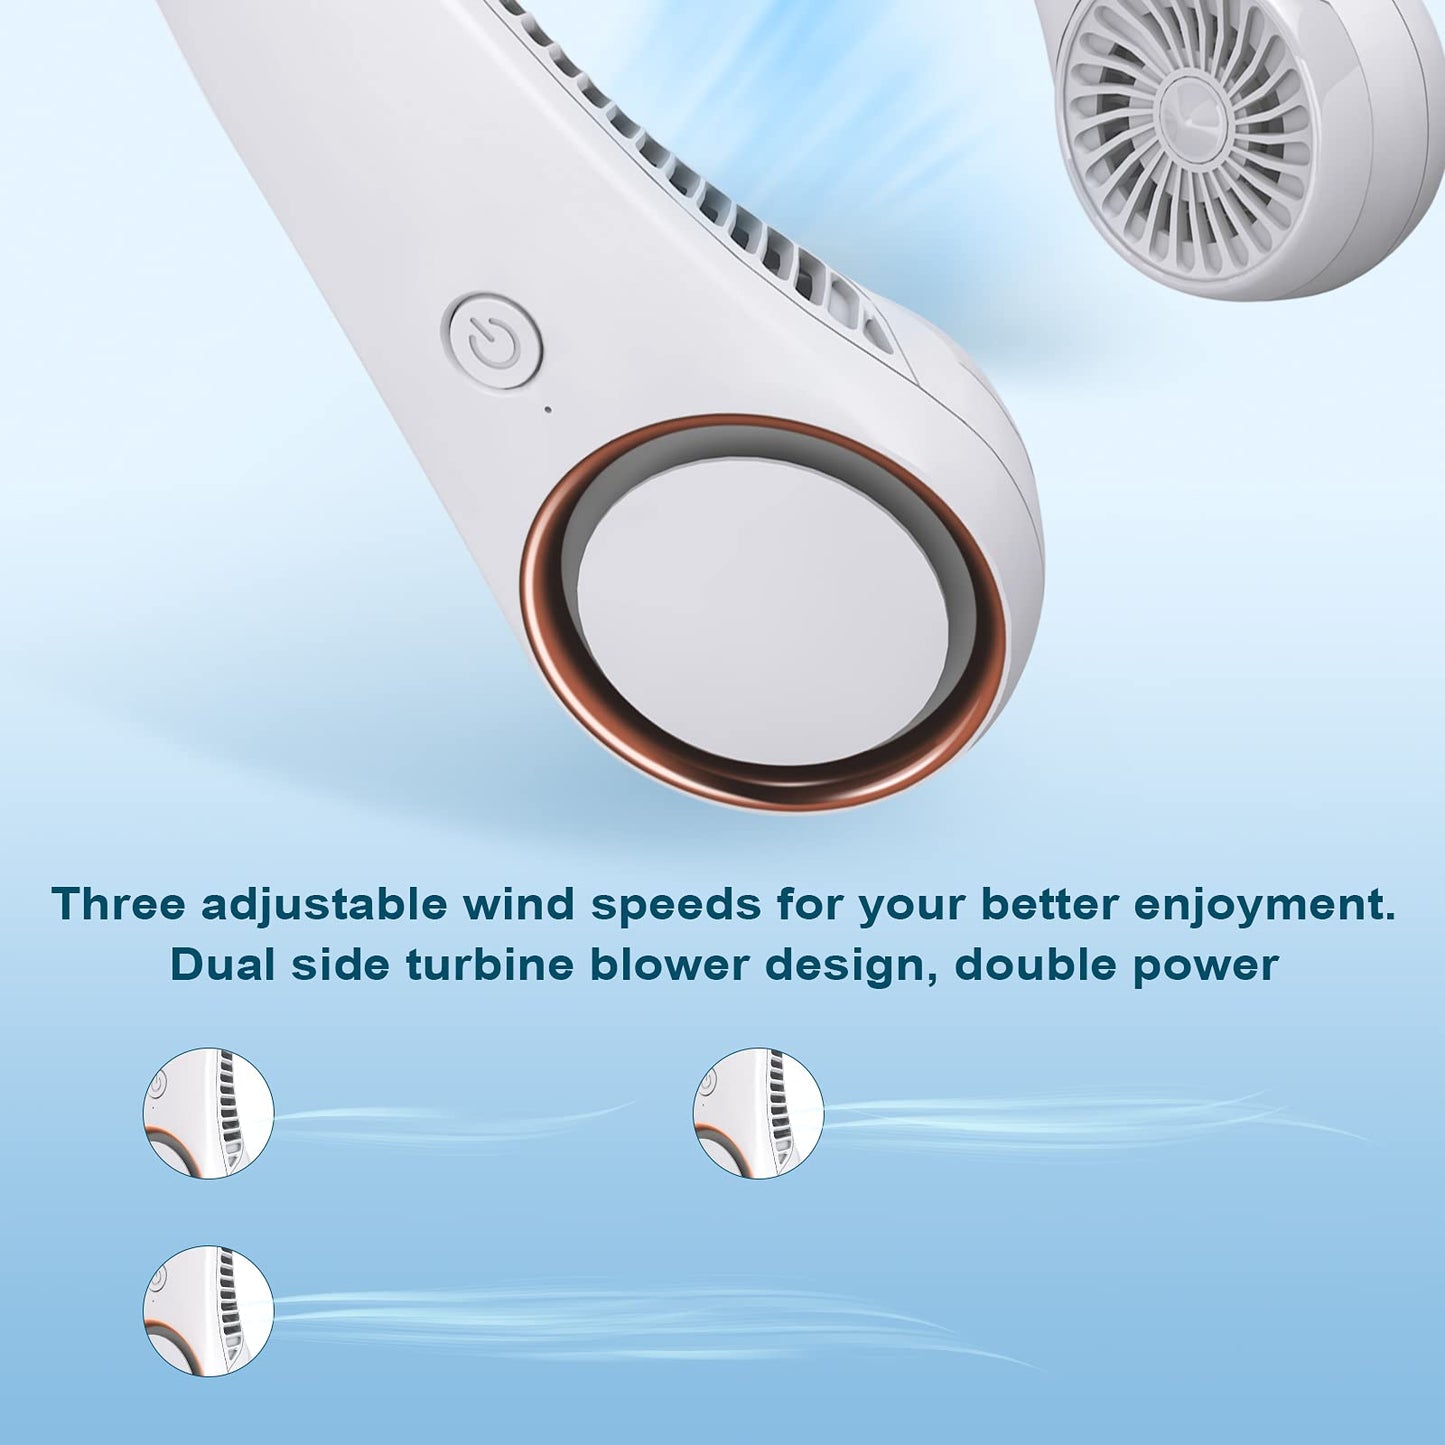 CIVPOWER Portable Neck Fan,Hands Free Bladeless Fan, Cooling Personal Fan,3 Speeds Adjustment,78 Air Outlet,Headphone Design,Rechargeable,USB Powered Neck Fan for Outdoor Indoor-White